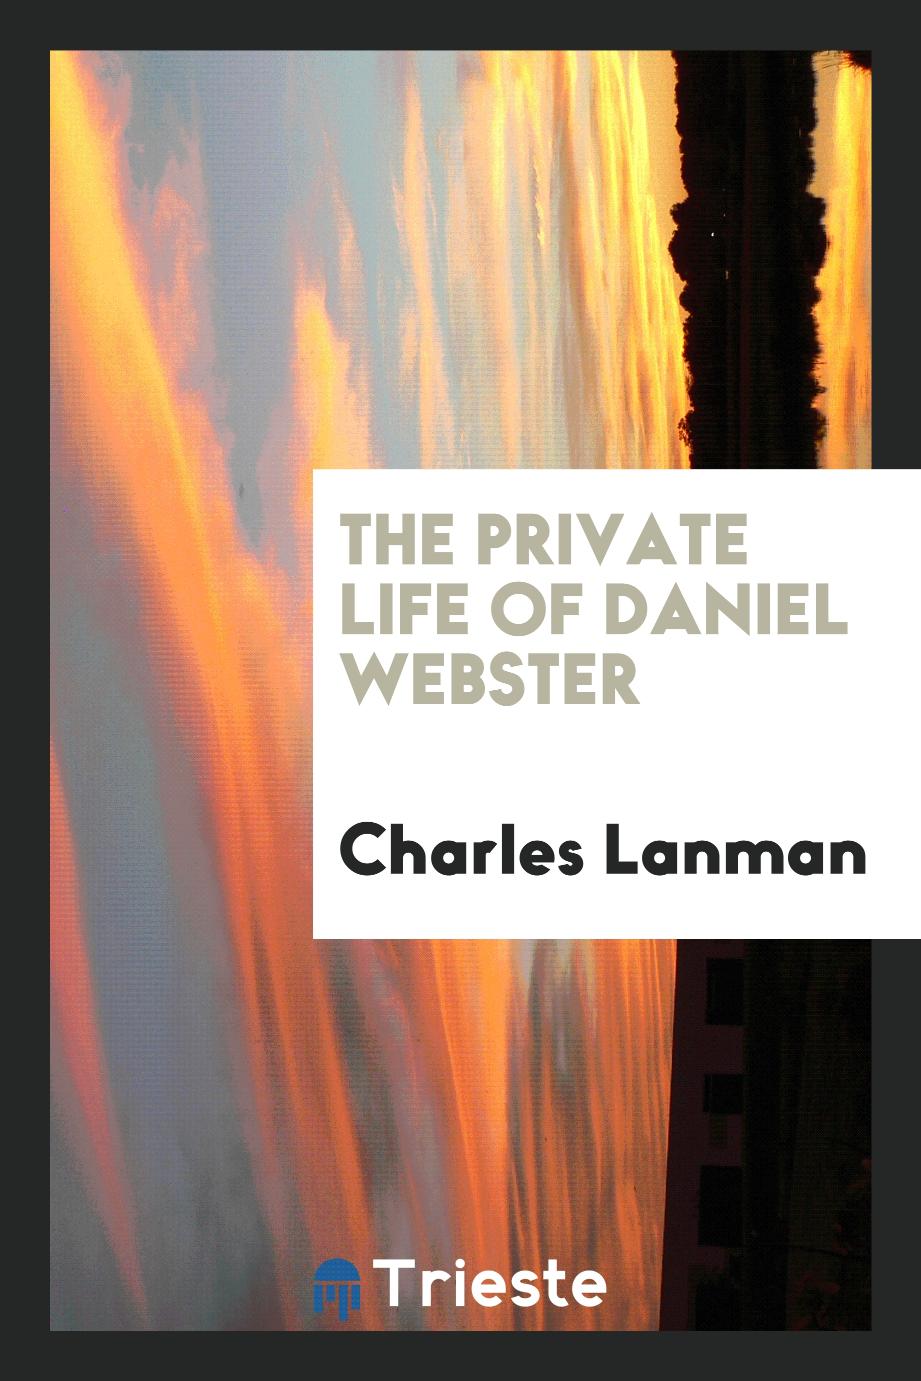 The private life of Daniel Webster